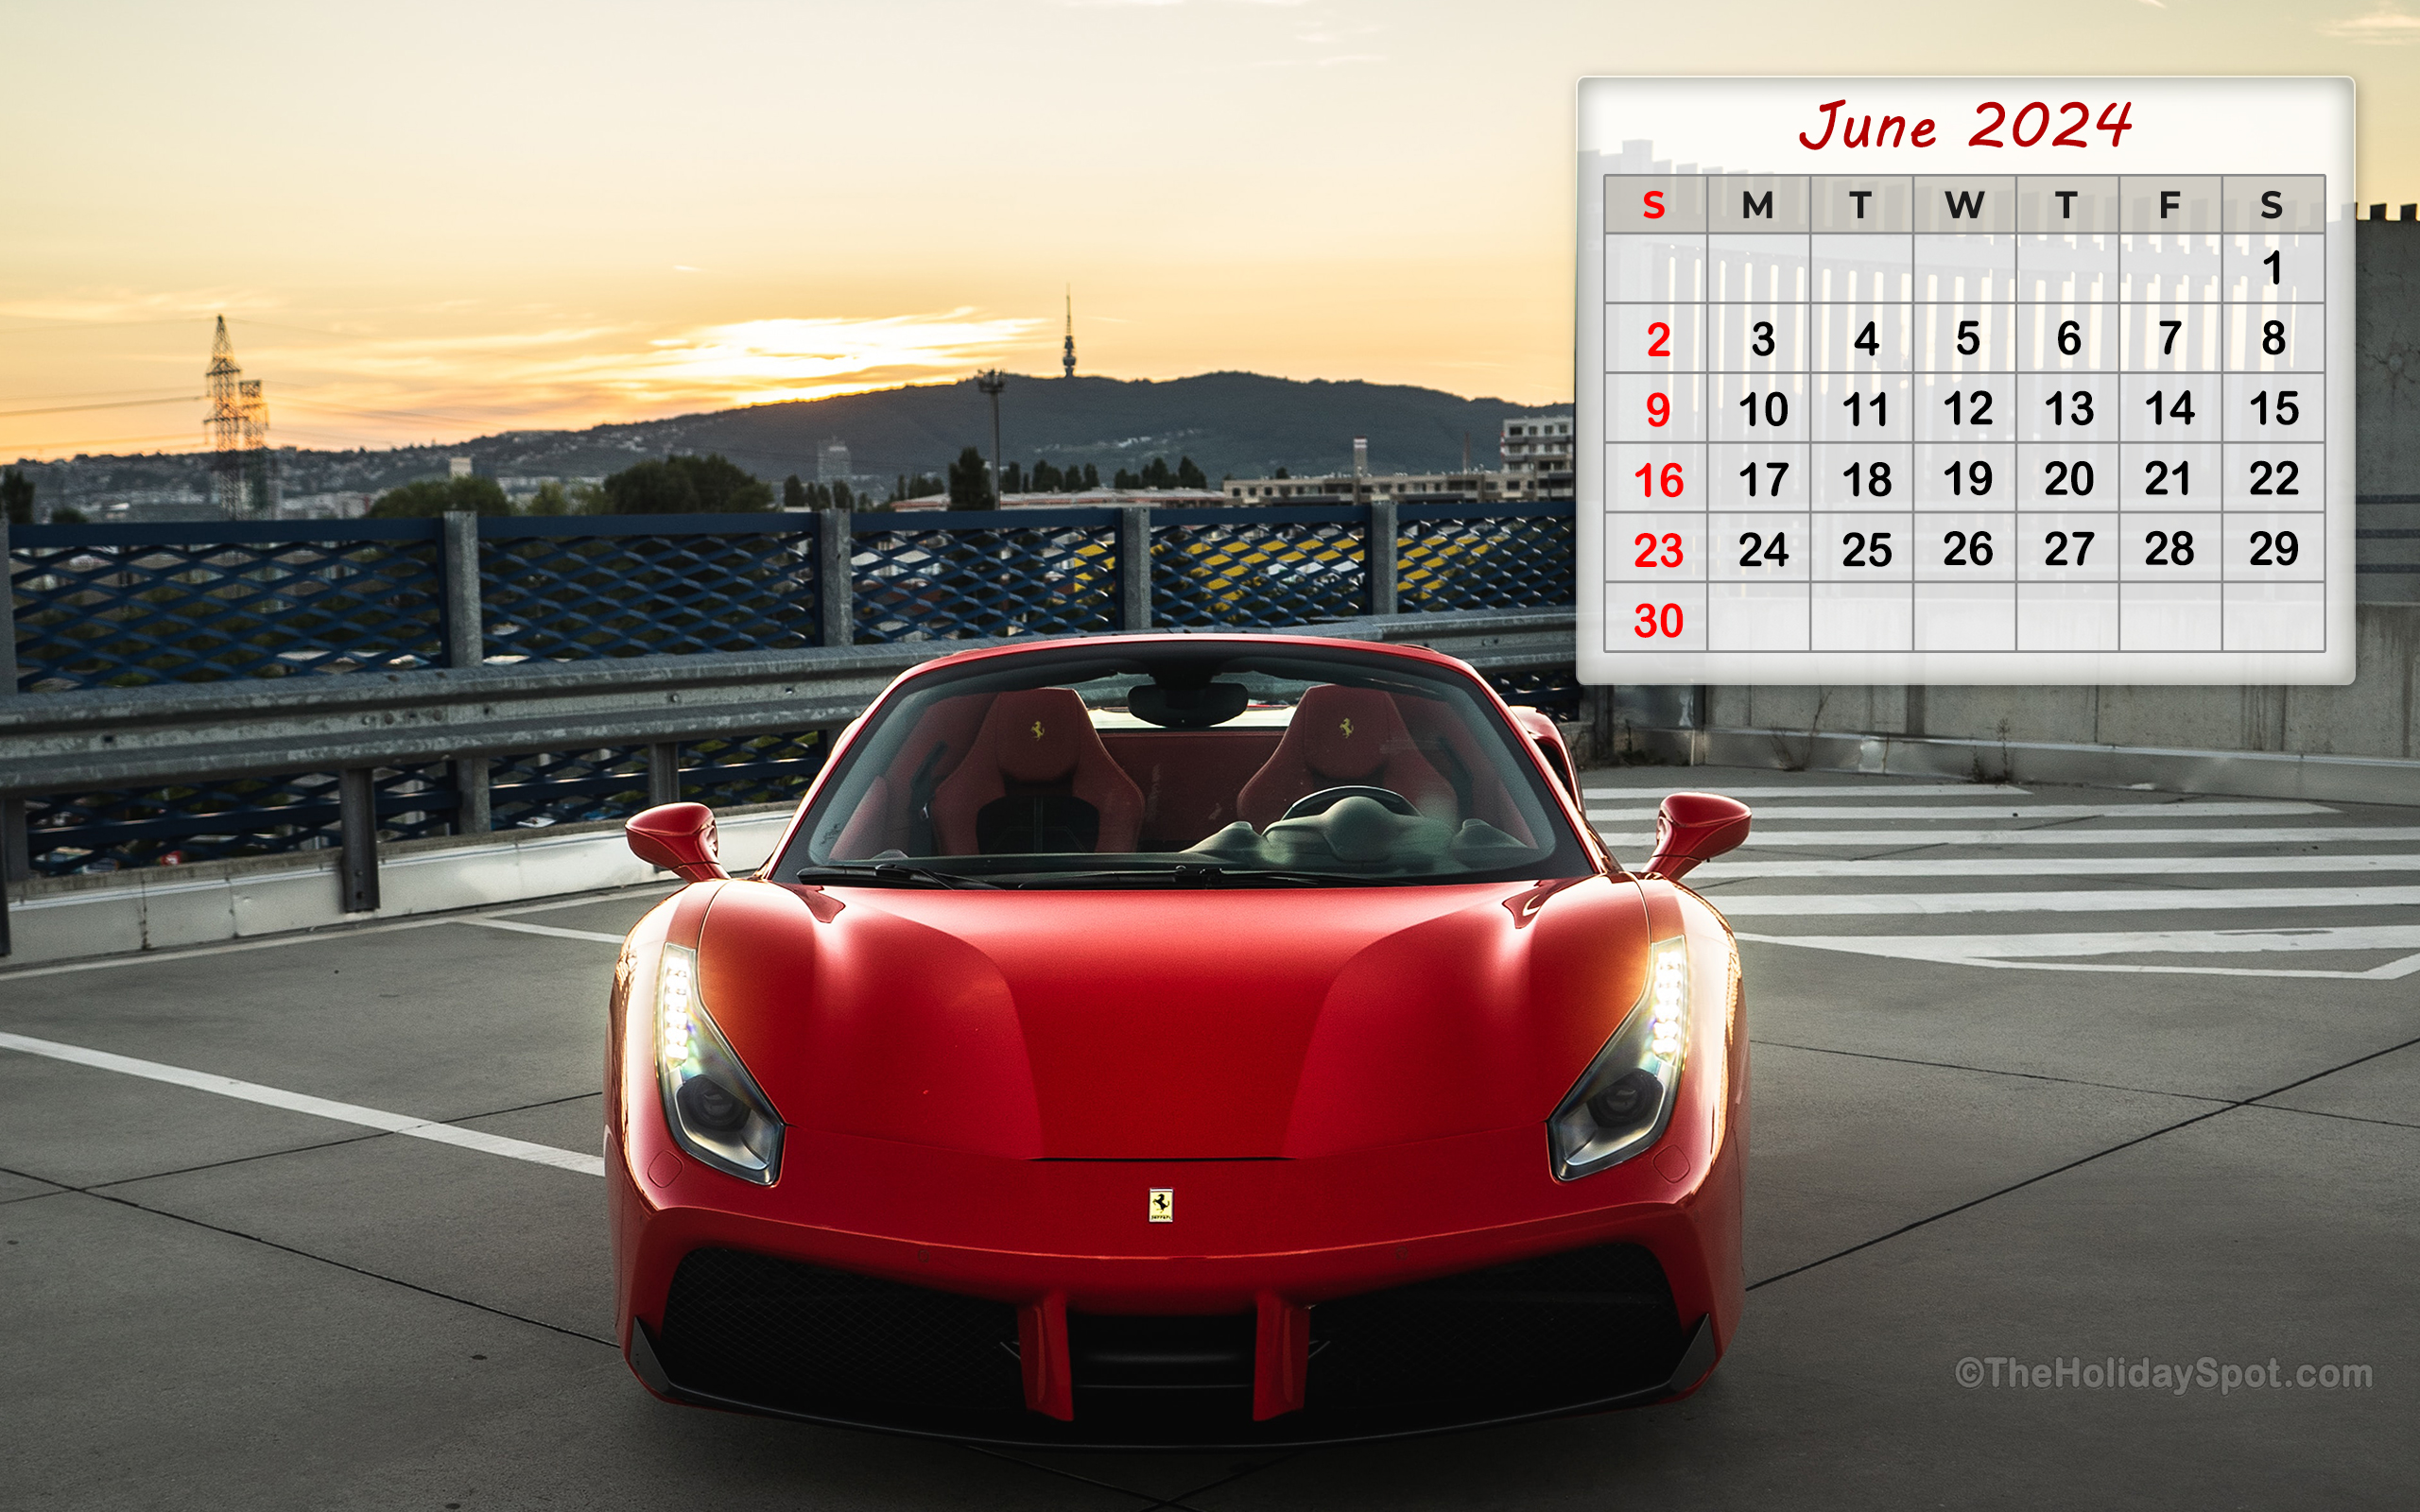 4K Month wise Calender Wallpaper 2024